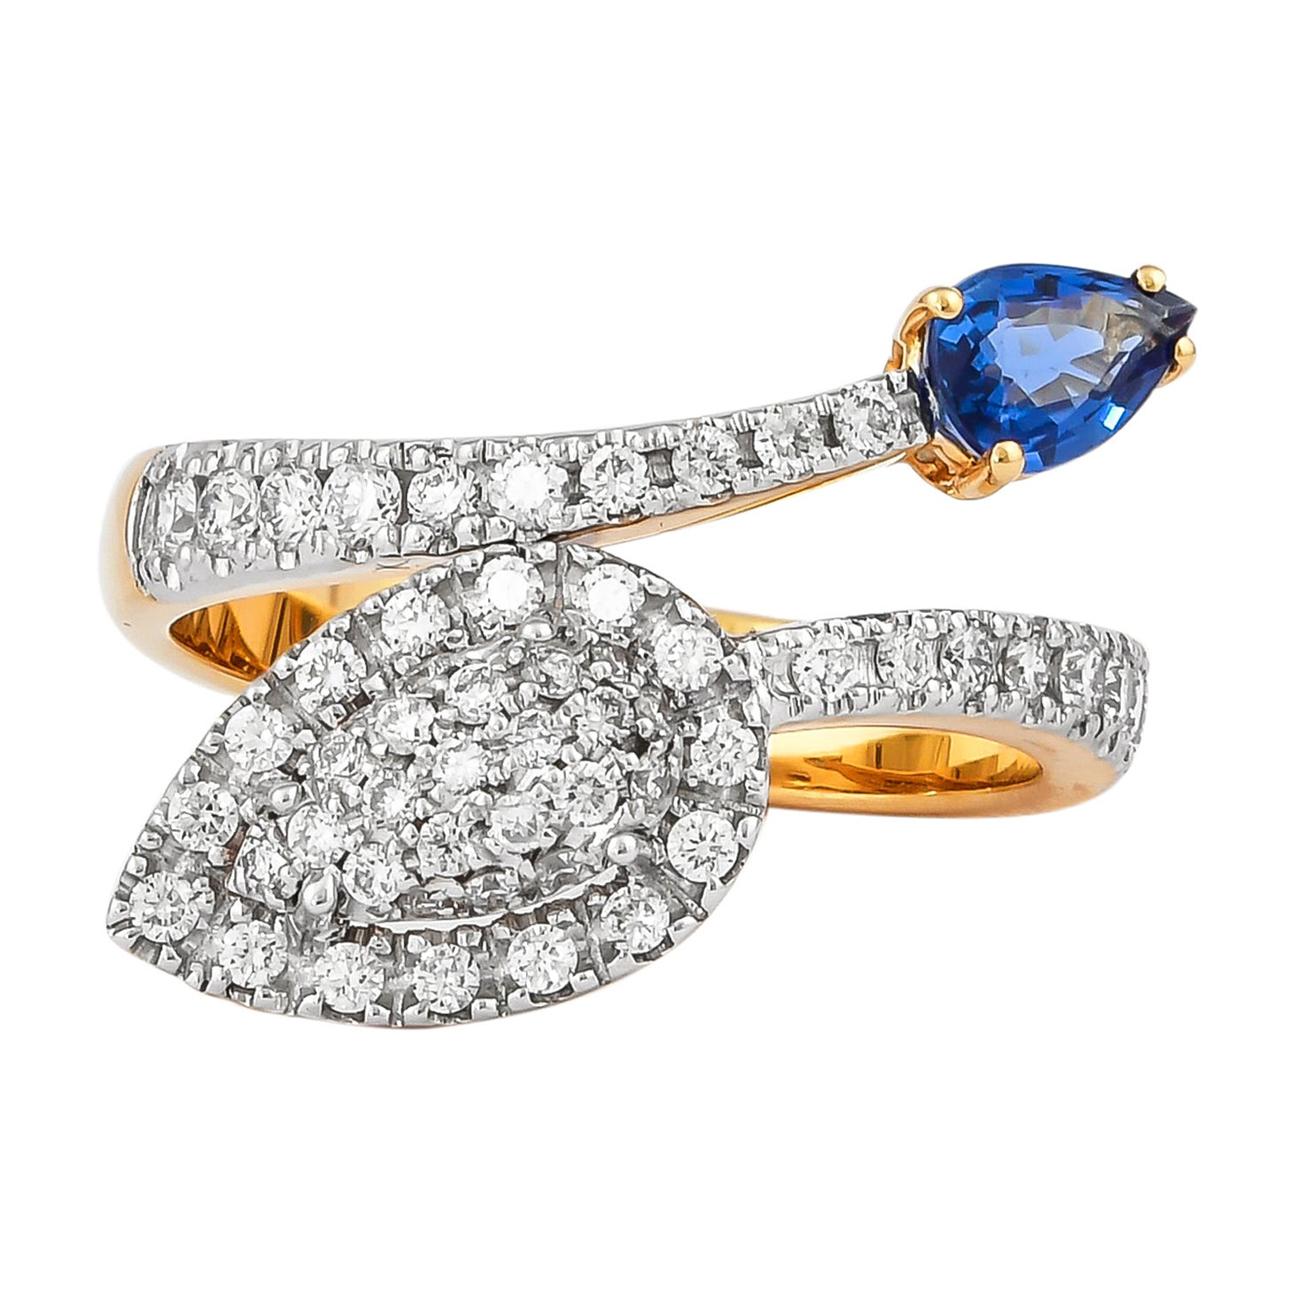 0.55 Carat Blue Sapphire and Diamond Ring in 18 Karat Yellow Gold For Sale